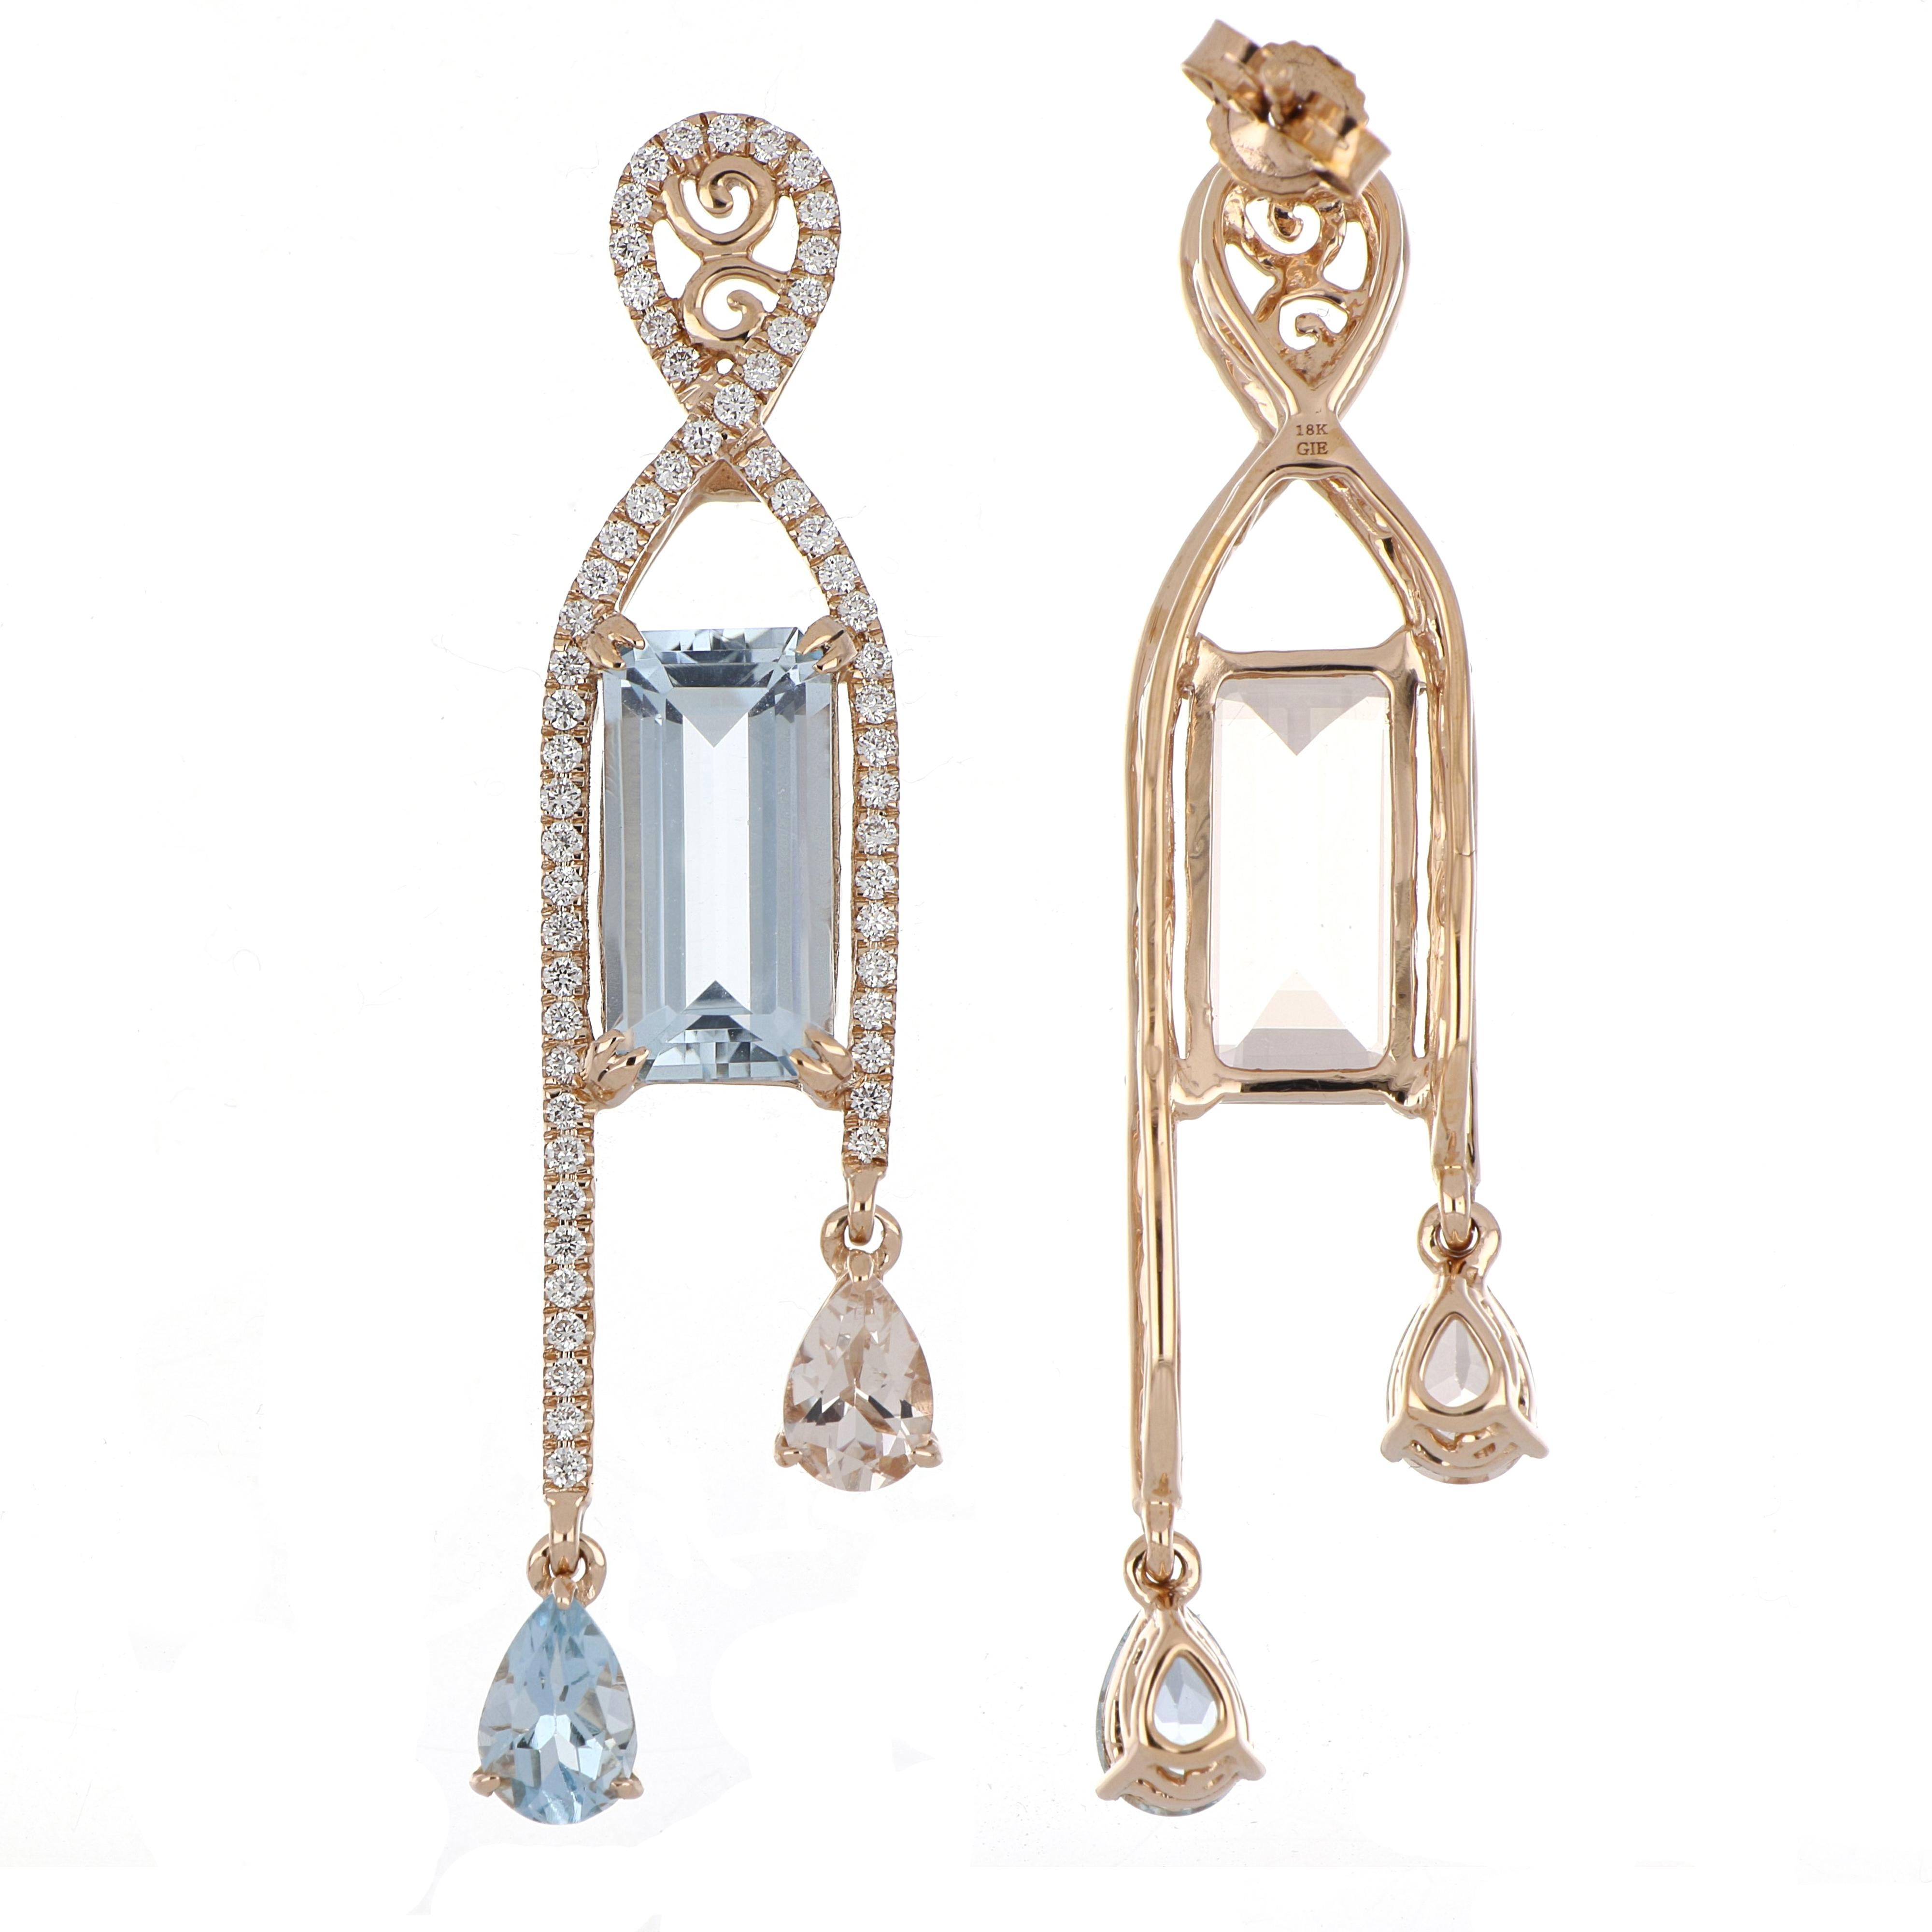 Elegant and Exquisitely detailed Mismatched Dangling Gold Earrings, set with 3.10 Ct (total ) Aquamarine, 3.25 Cts (total)  Morganite, accented with micro pave Diamonds, weighing approx. 0.61 Cts. total carat weight. Beautifully Hand crafted in 18